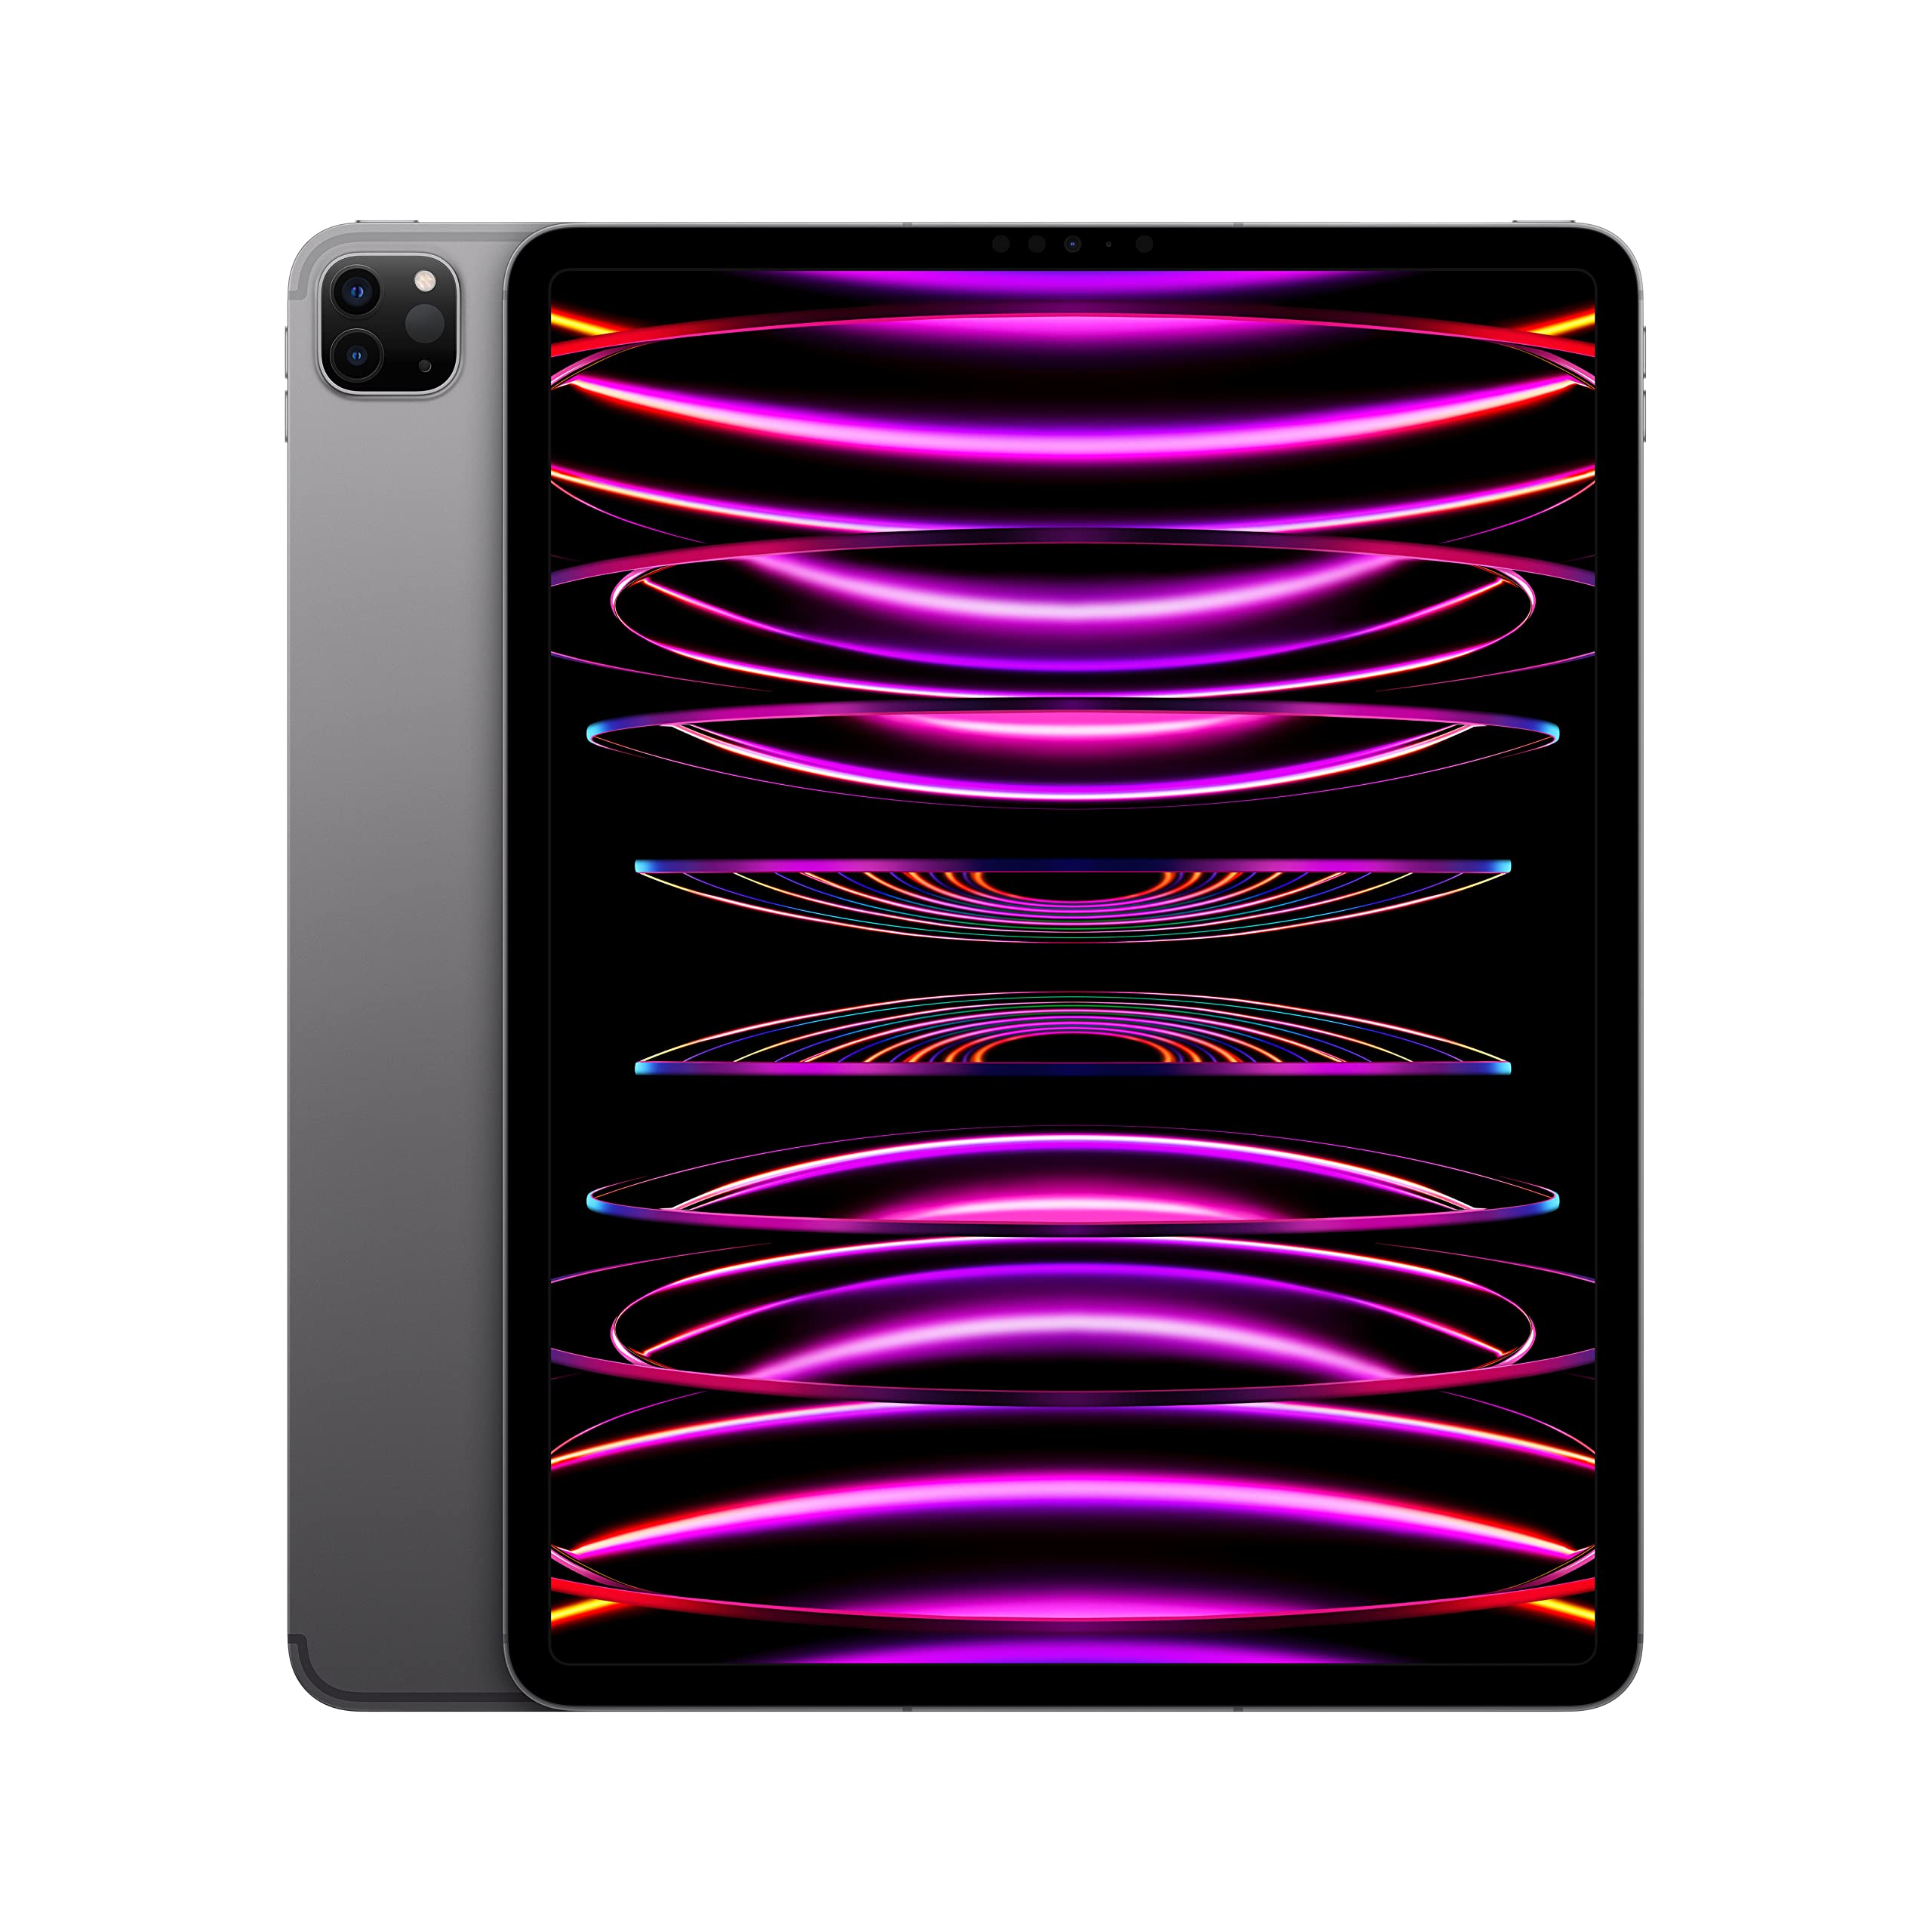 Apple iPad Pro 12.9-inch (6th Generation): with M2 chip, Liquid Retina XDR Display, 128GB, Wi-Fi 6E + 5G Cellular, 12MP front/12MP and 10MP Back Cameras, Face ID, All-Day Battery Life – Space Gray